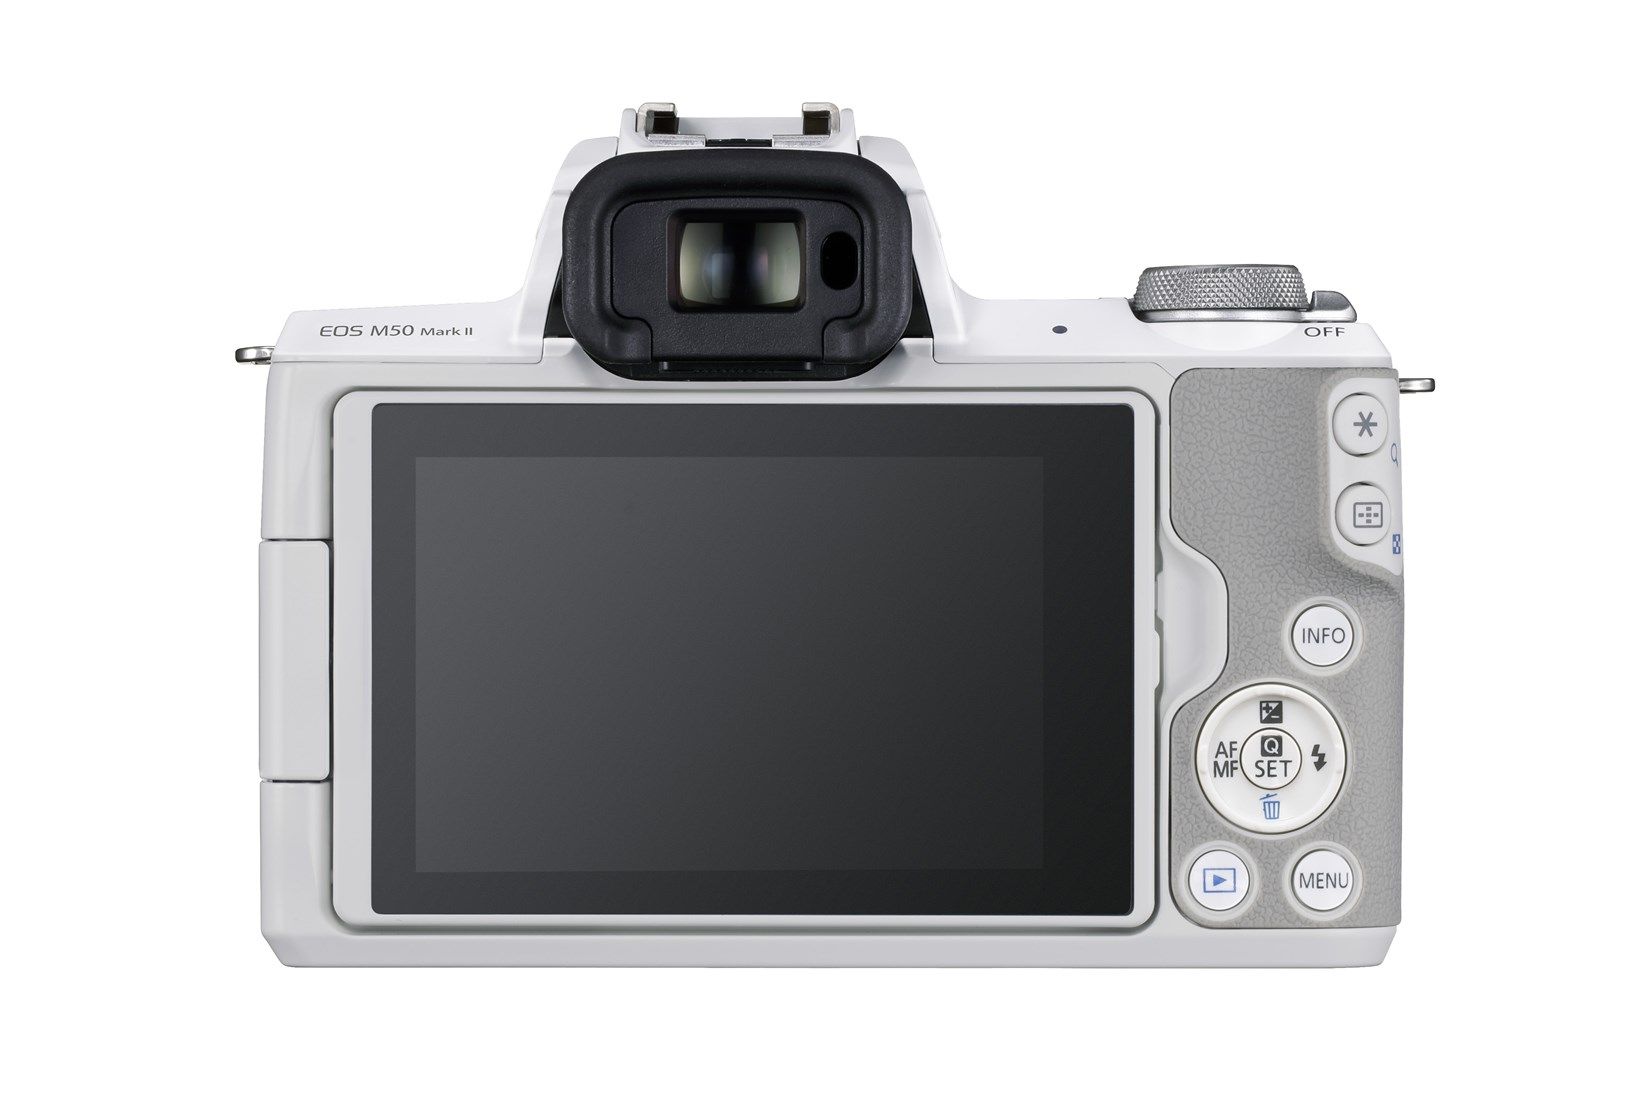 Canon EOS M50 Mark II Camera with EF-M 15-45mm Lens Kit - White - Product Photo 2 - Rear view of the camera with the screen rotated into it's natural viewing position. Viewfinder and controls visible